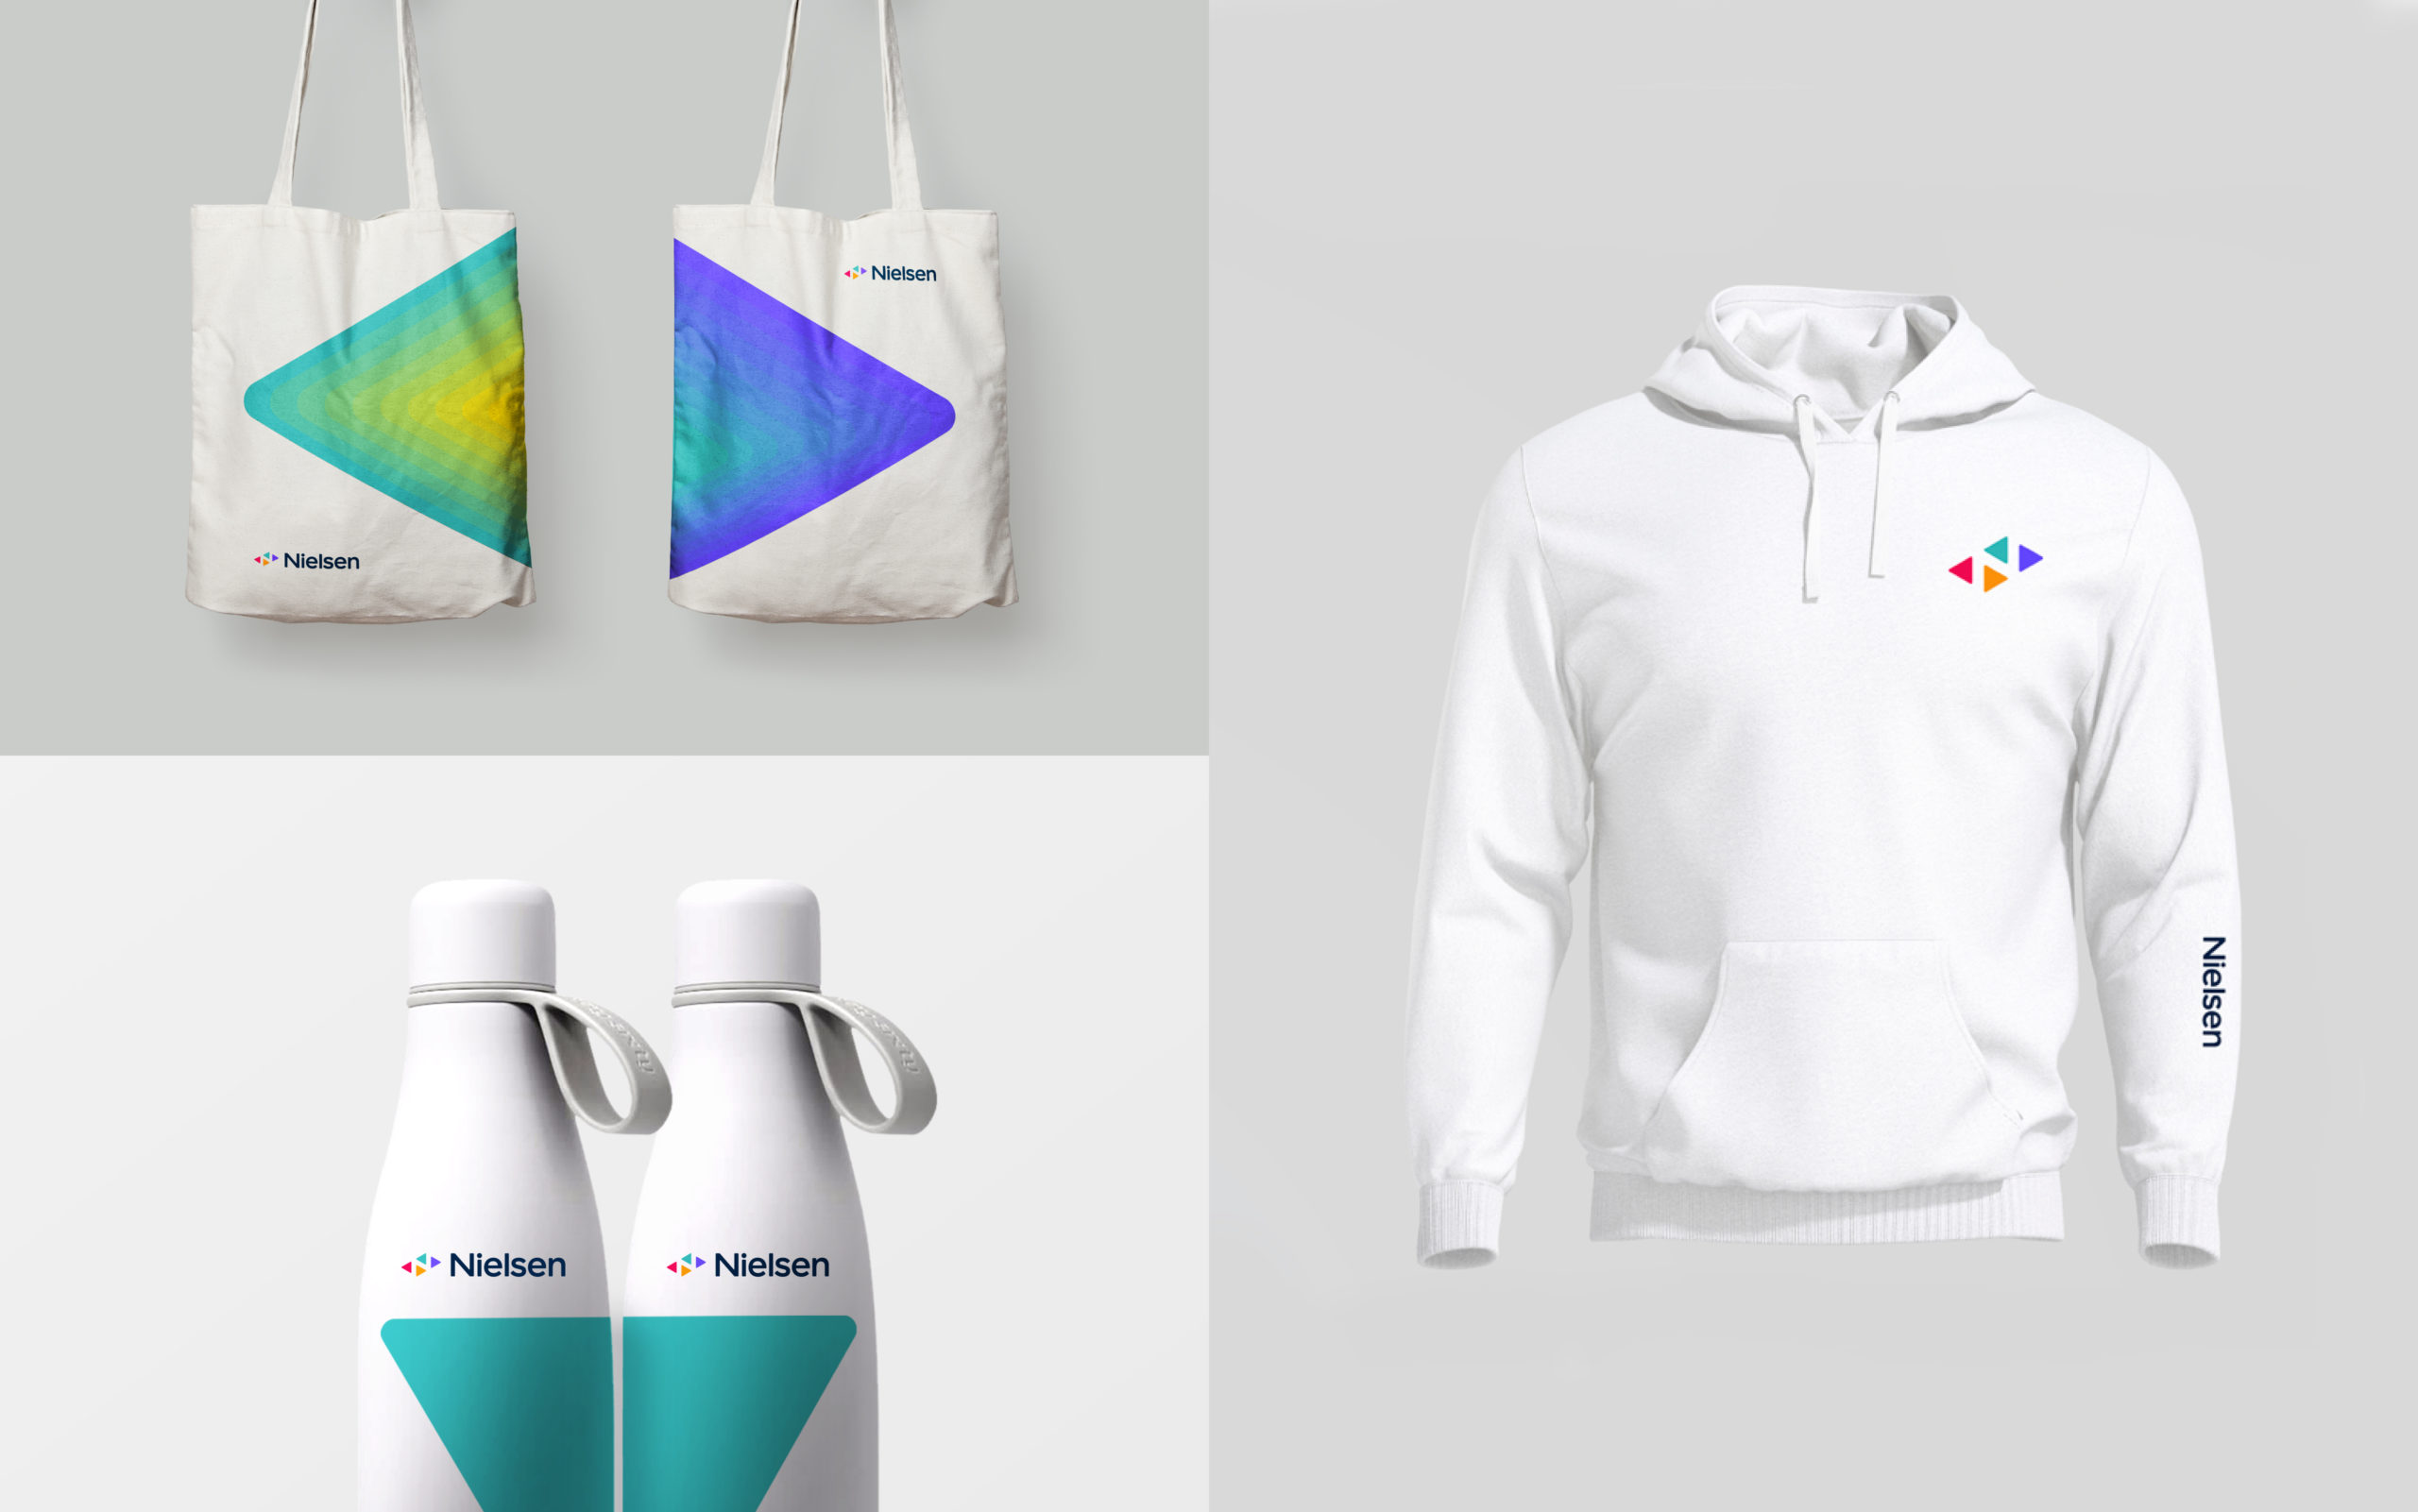 Nielsen’s new graphic design featured on water bottles, tote bags, and a sweatshirt